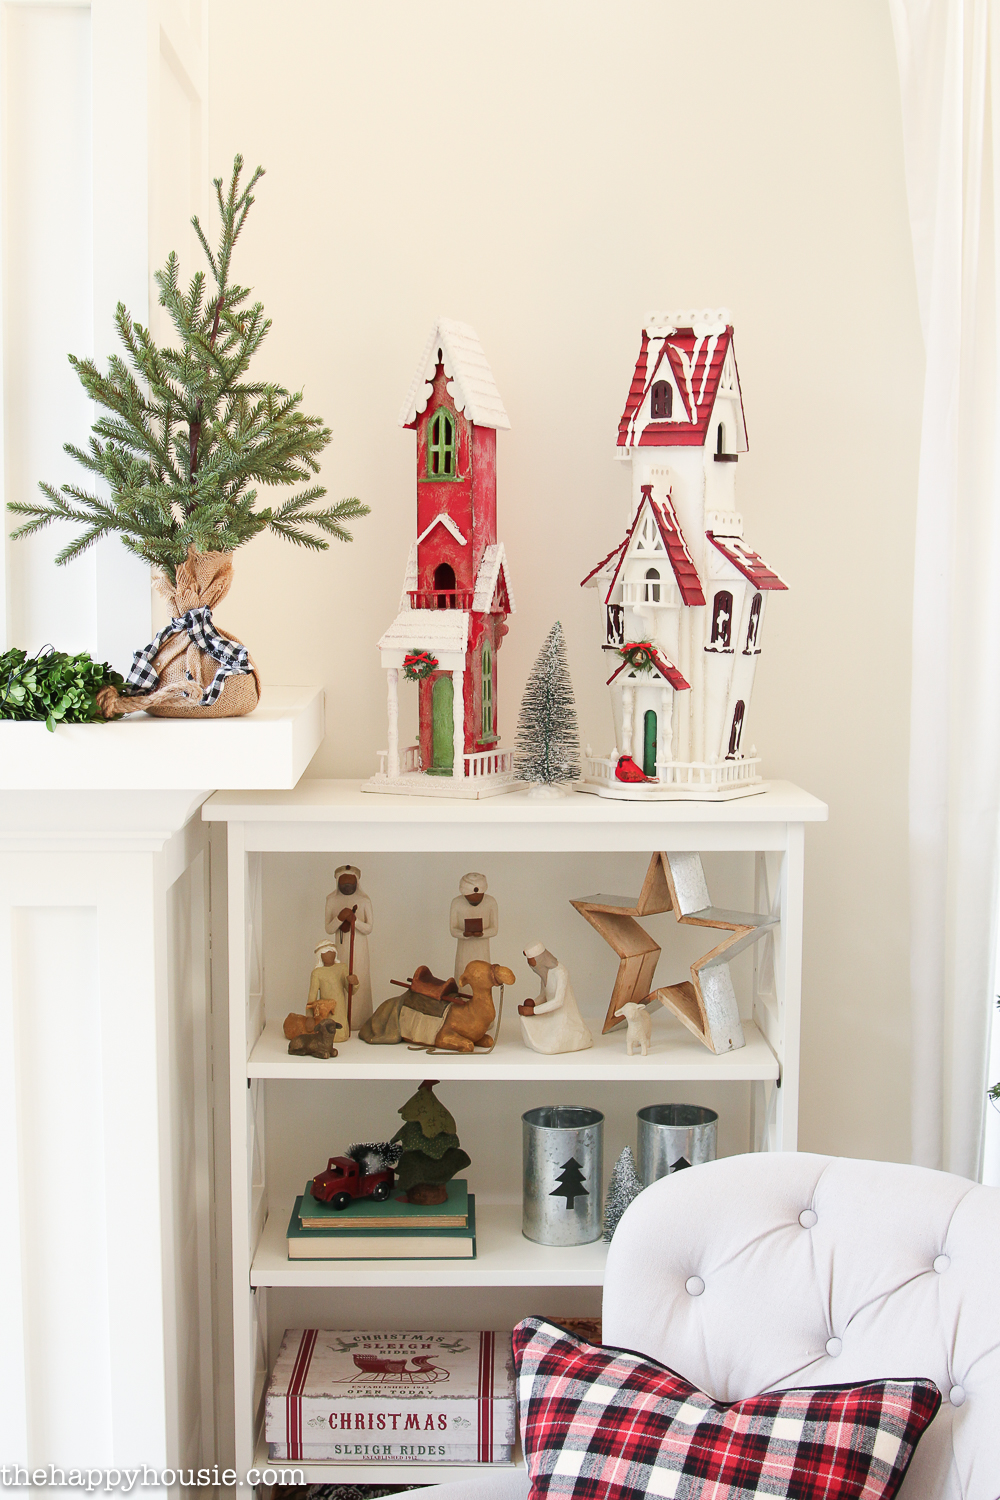 Shelving with holiday items on it.